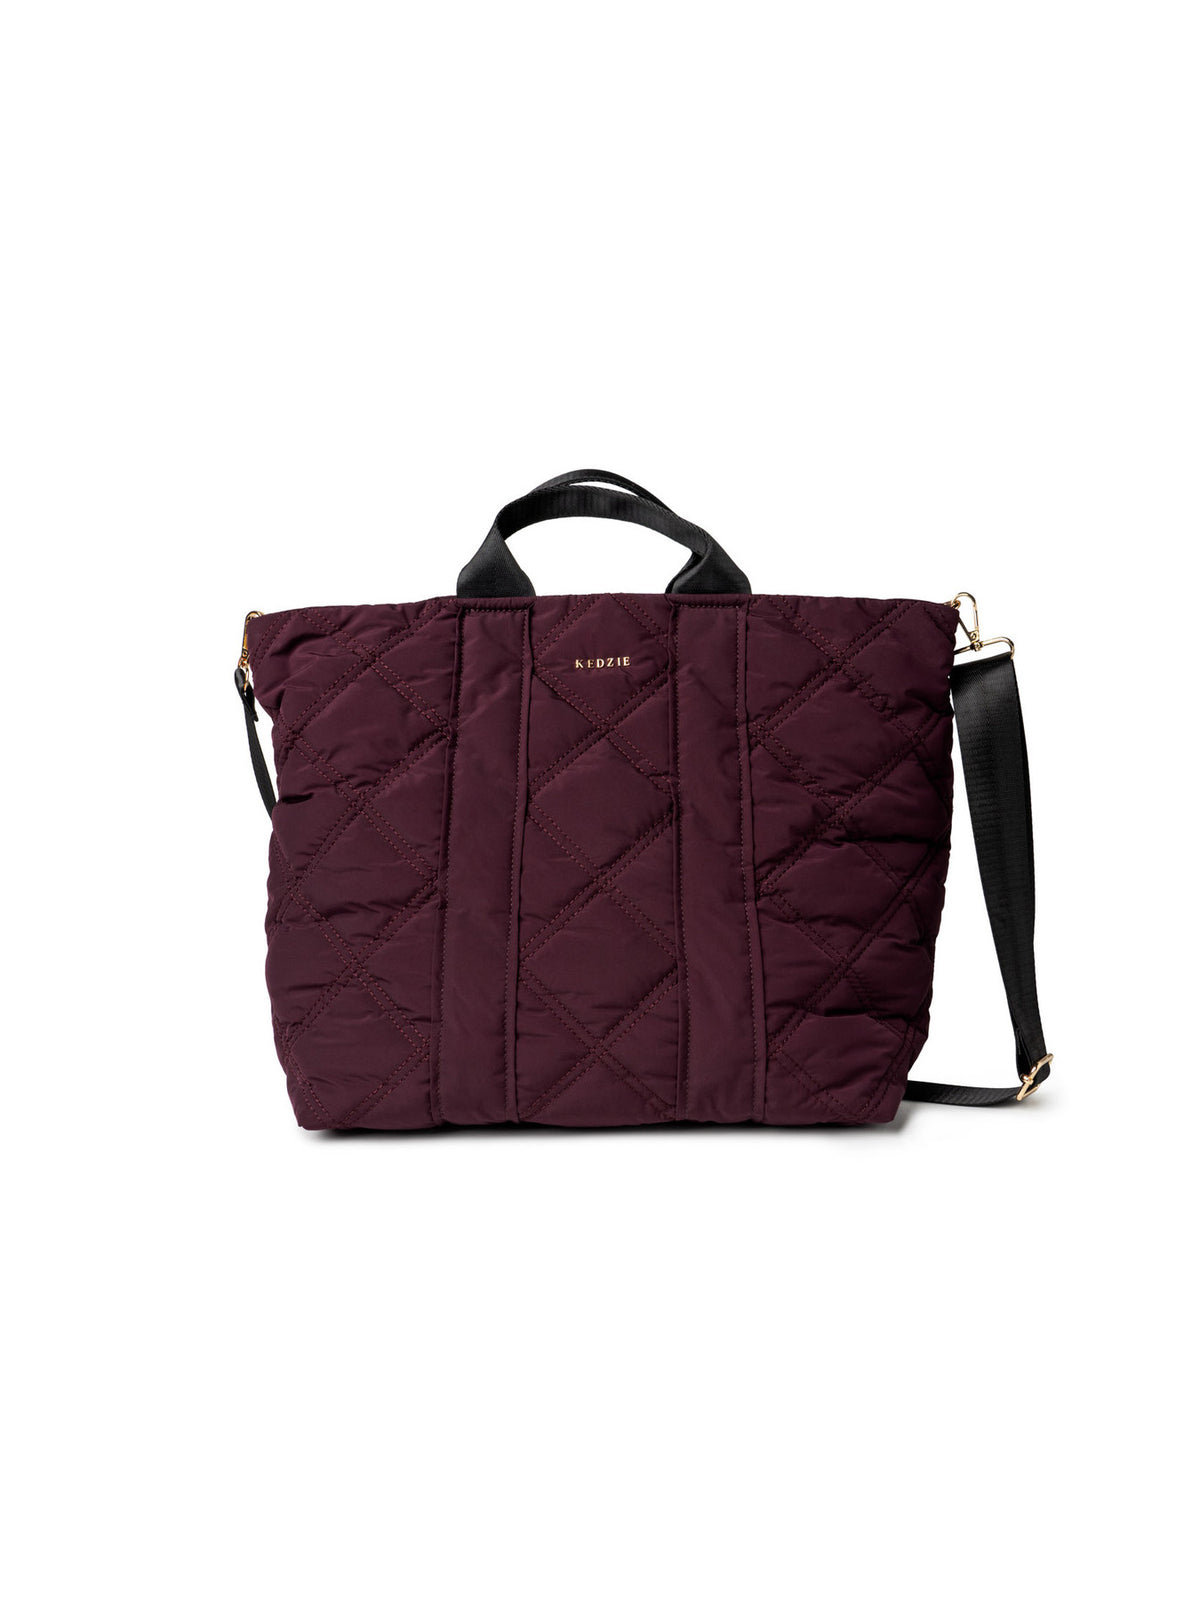 kedzie cloud 9 quilted tote bag in mulberry